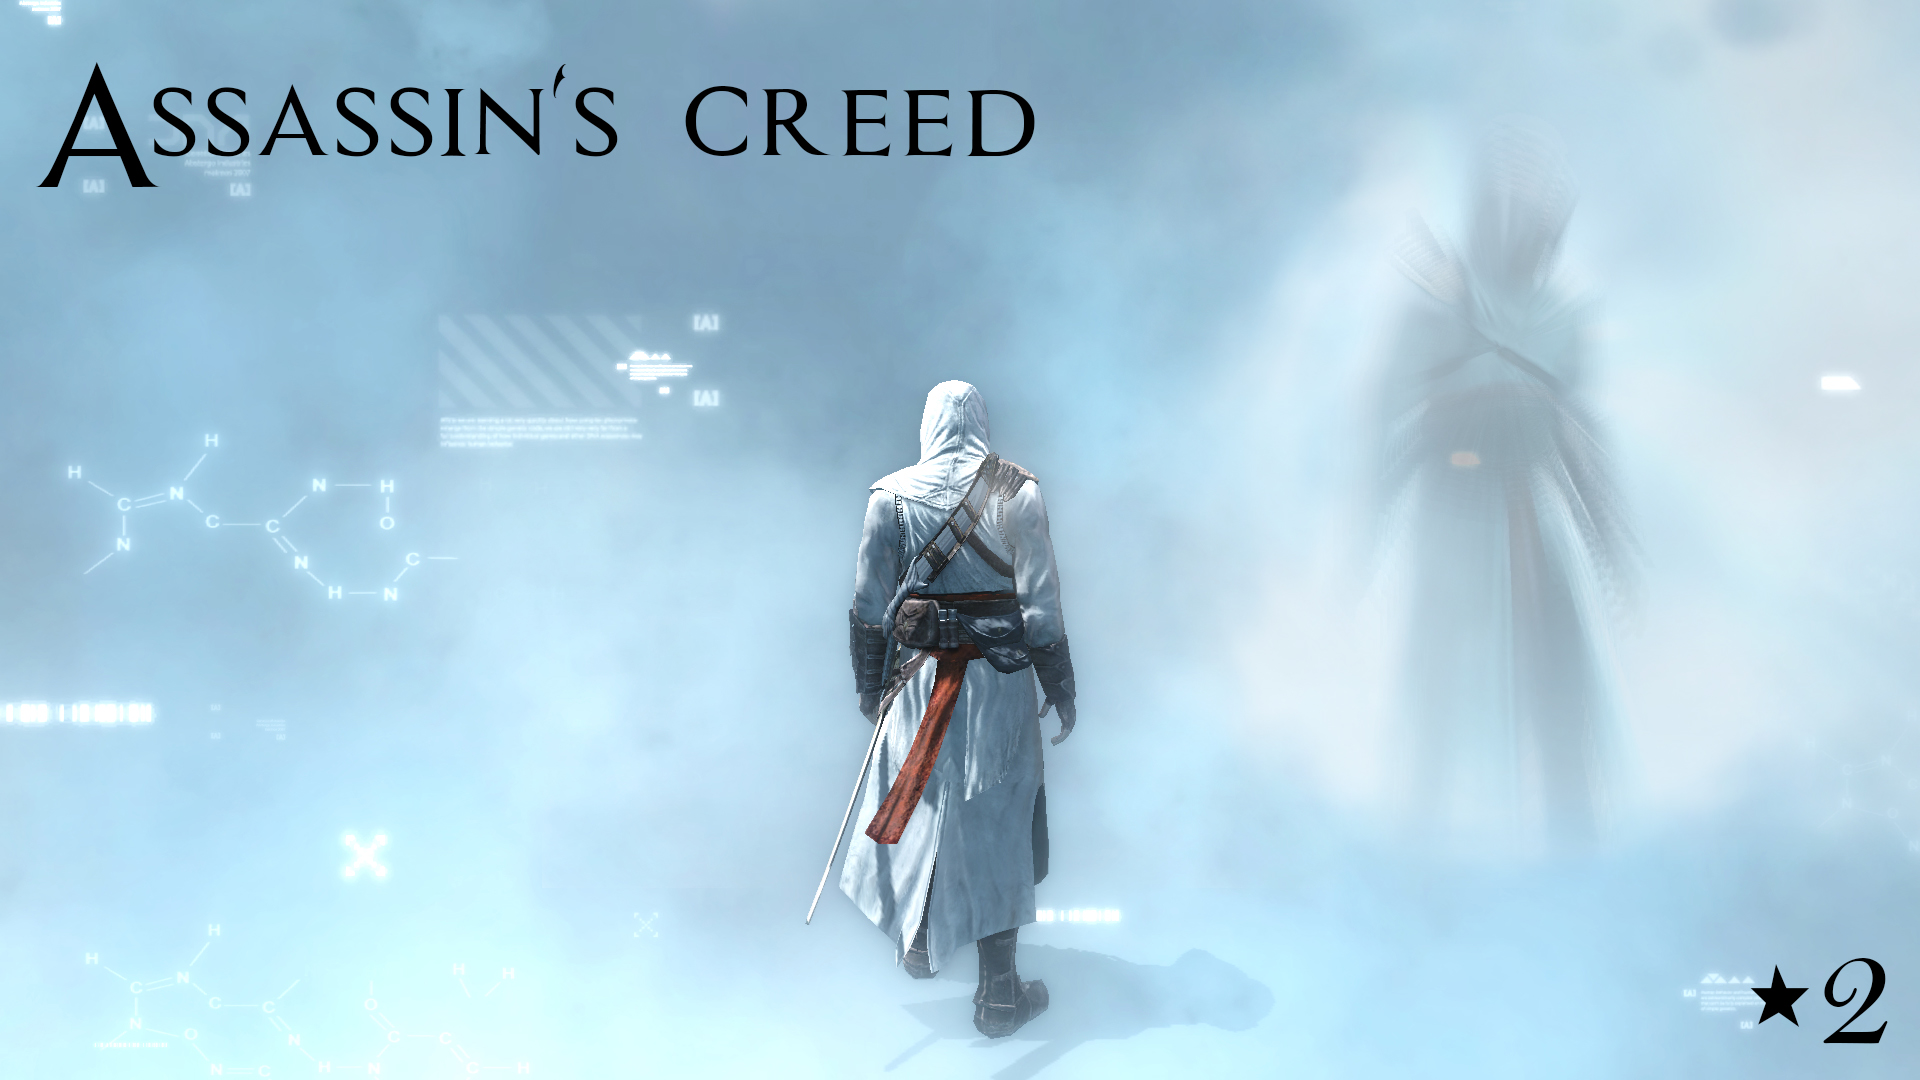 Assassin’s Creed #2